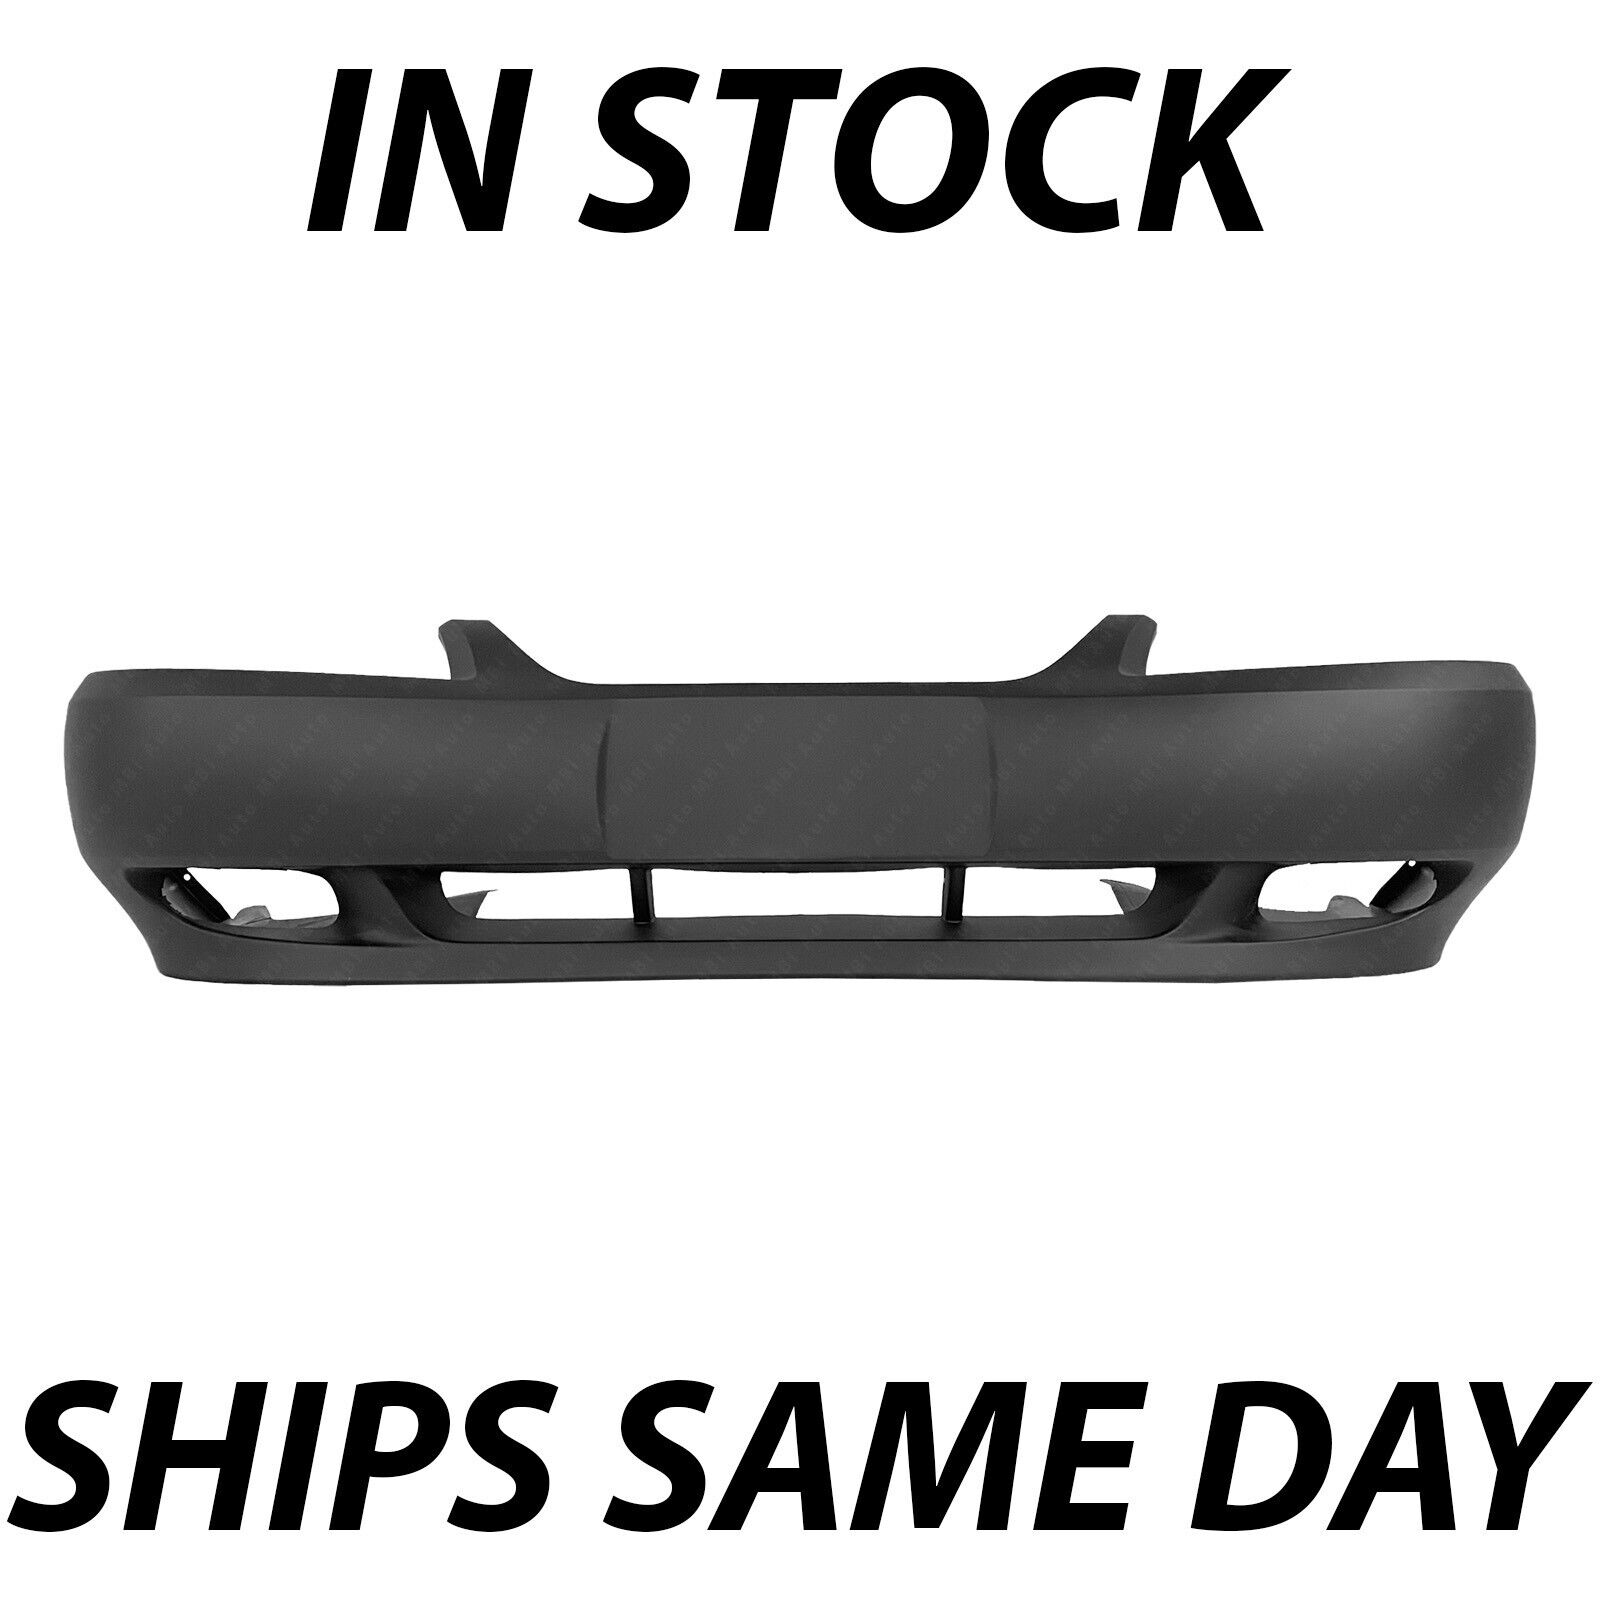 NEW Primered - Front Bumper Cover Fascia for 1999-2004 Ford Mustang GT 99-04